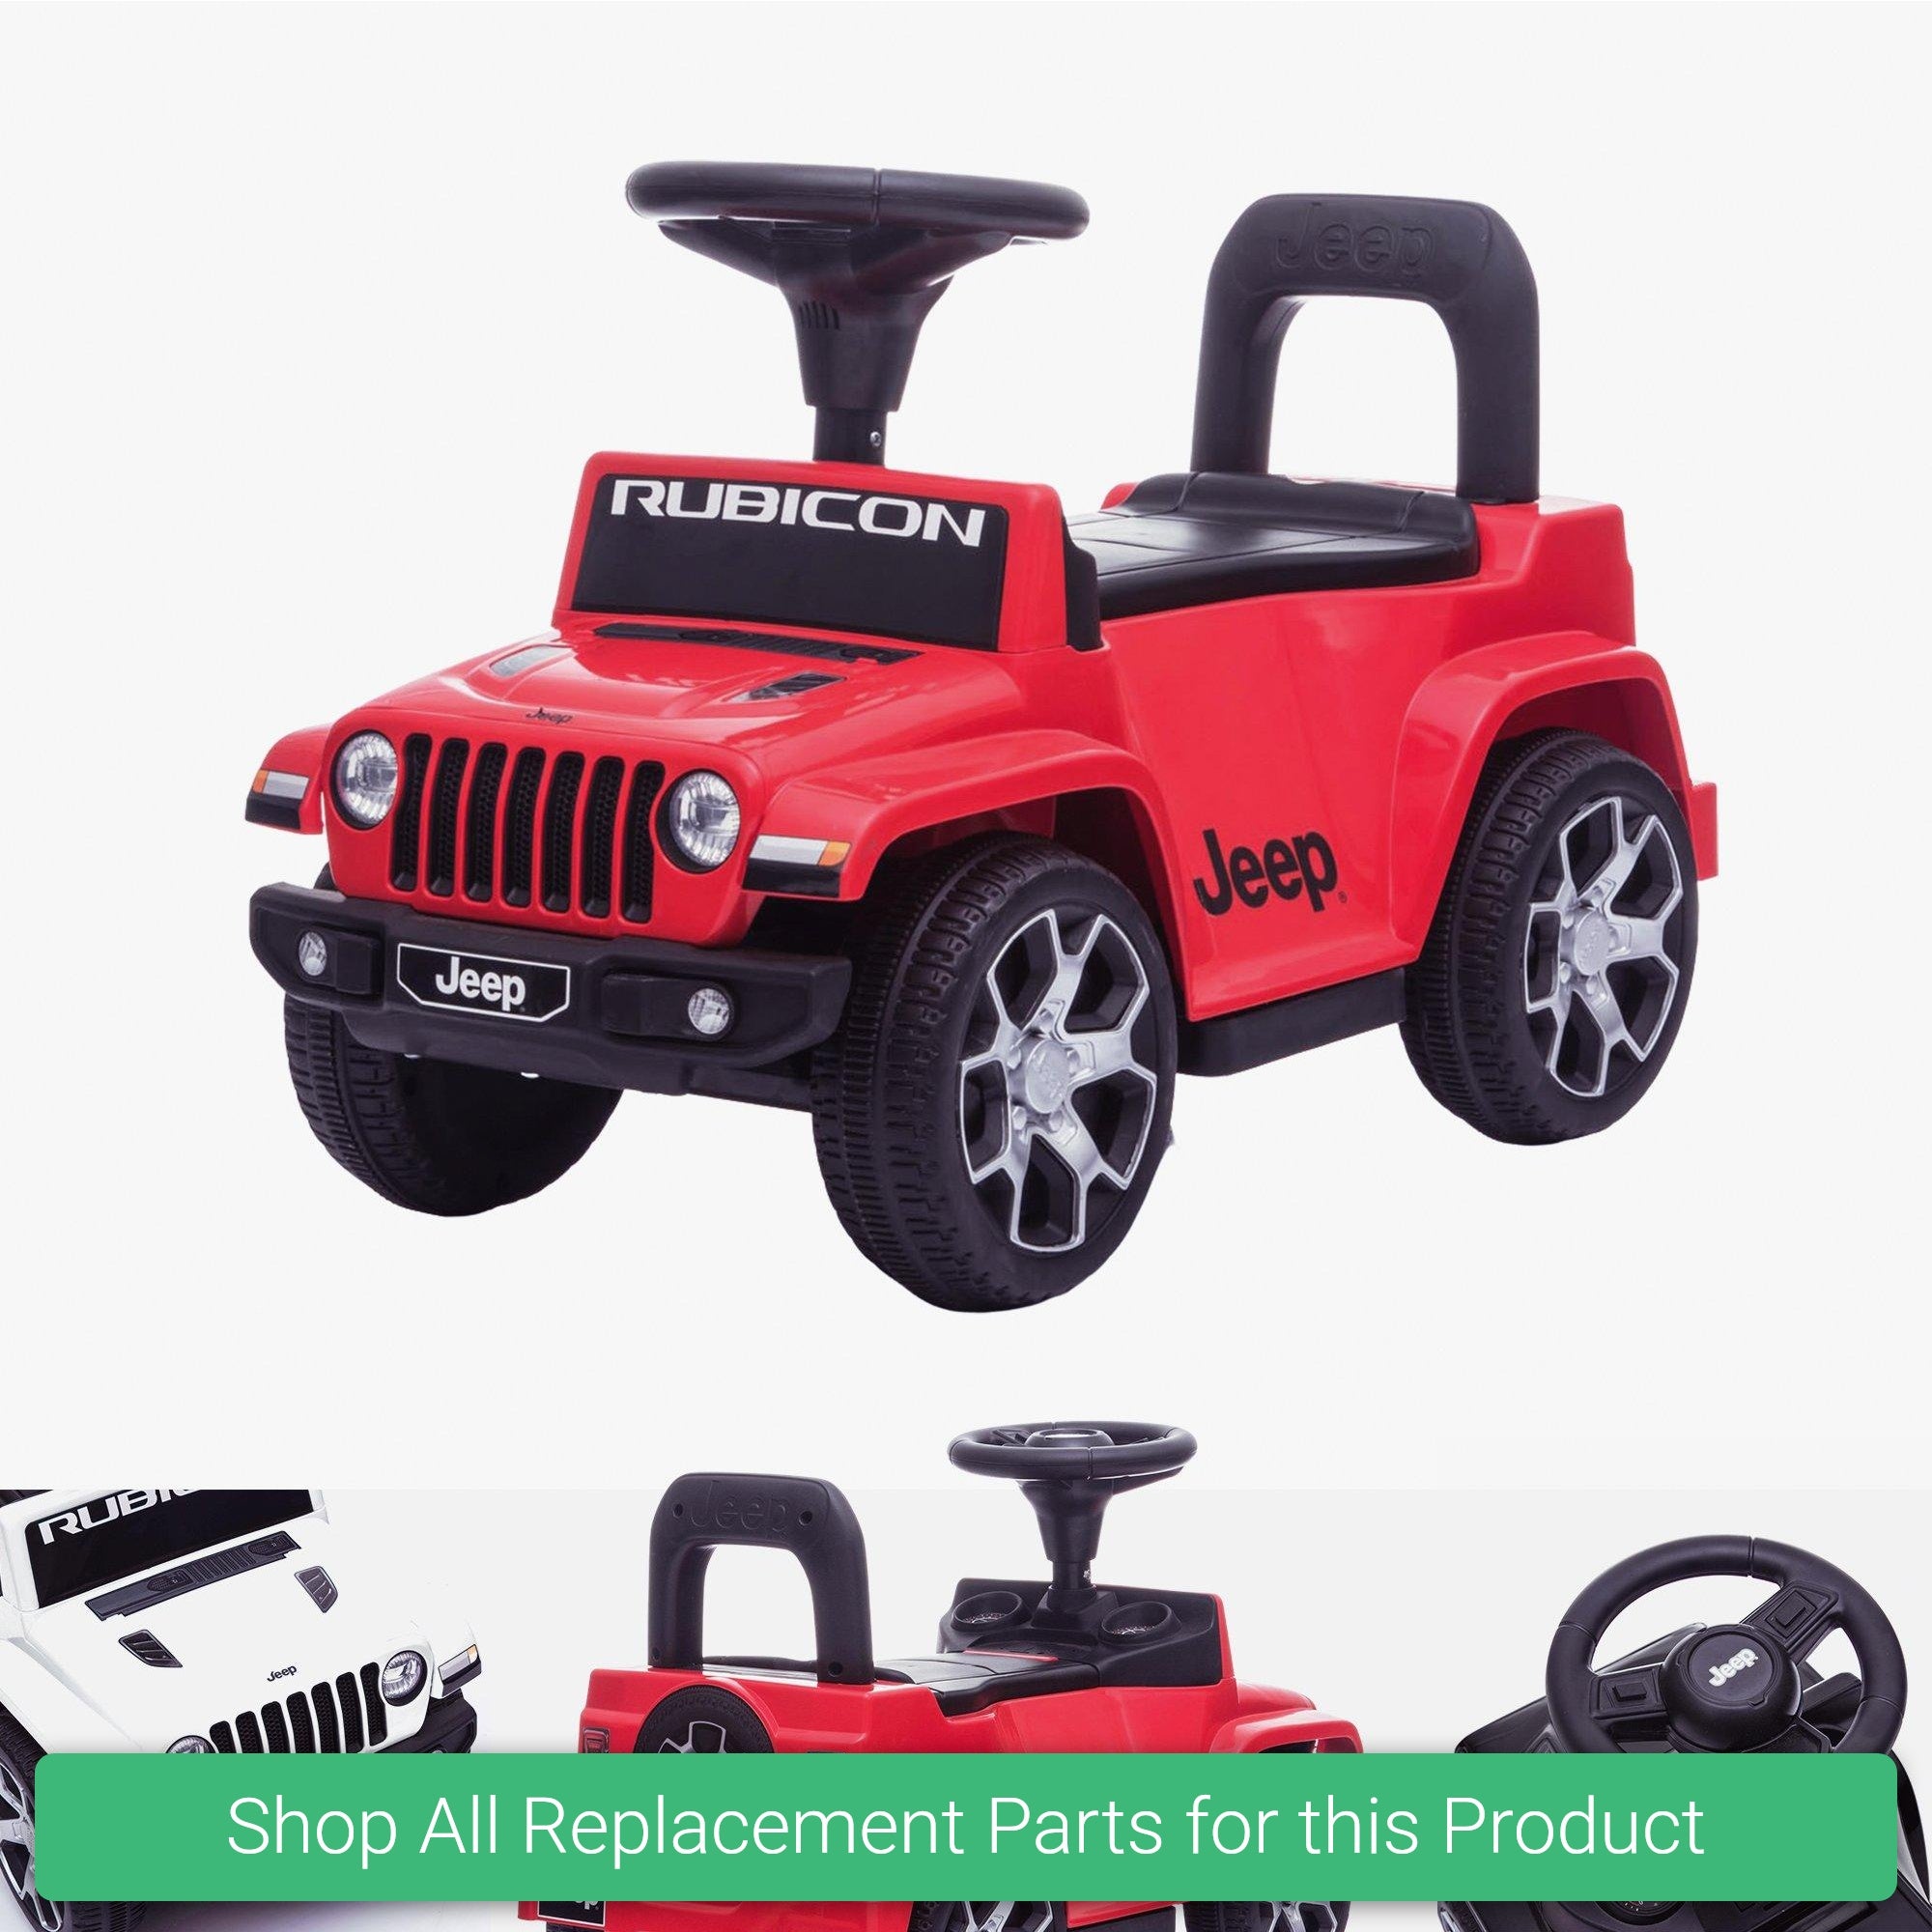 Replacement Parts and Spares for Kids Jeep Rubicon Licensed Push Along Car - JRUB-6-VARI - DK-P03 Highest Version